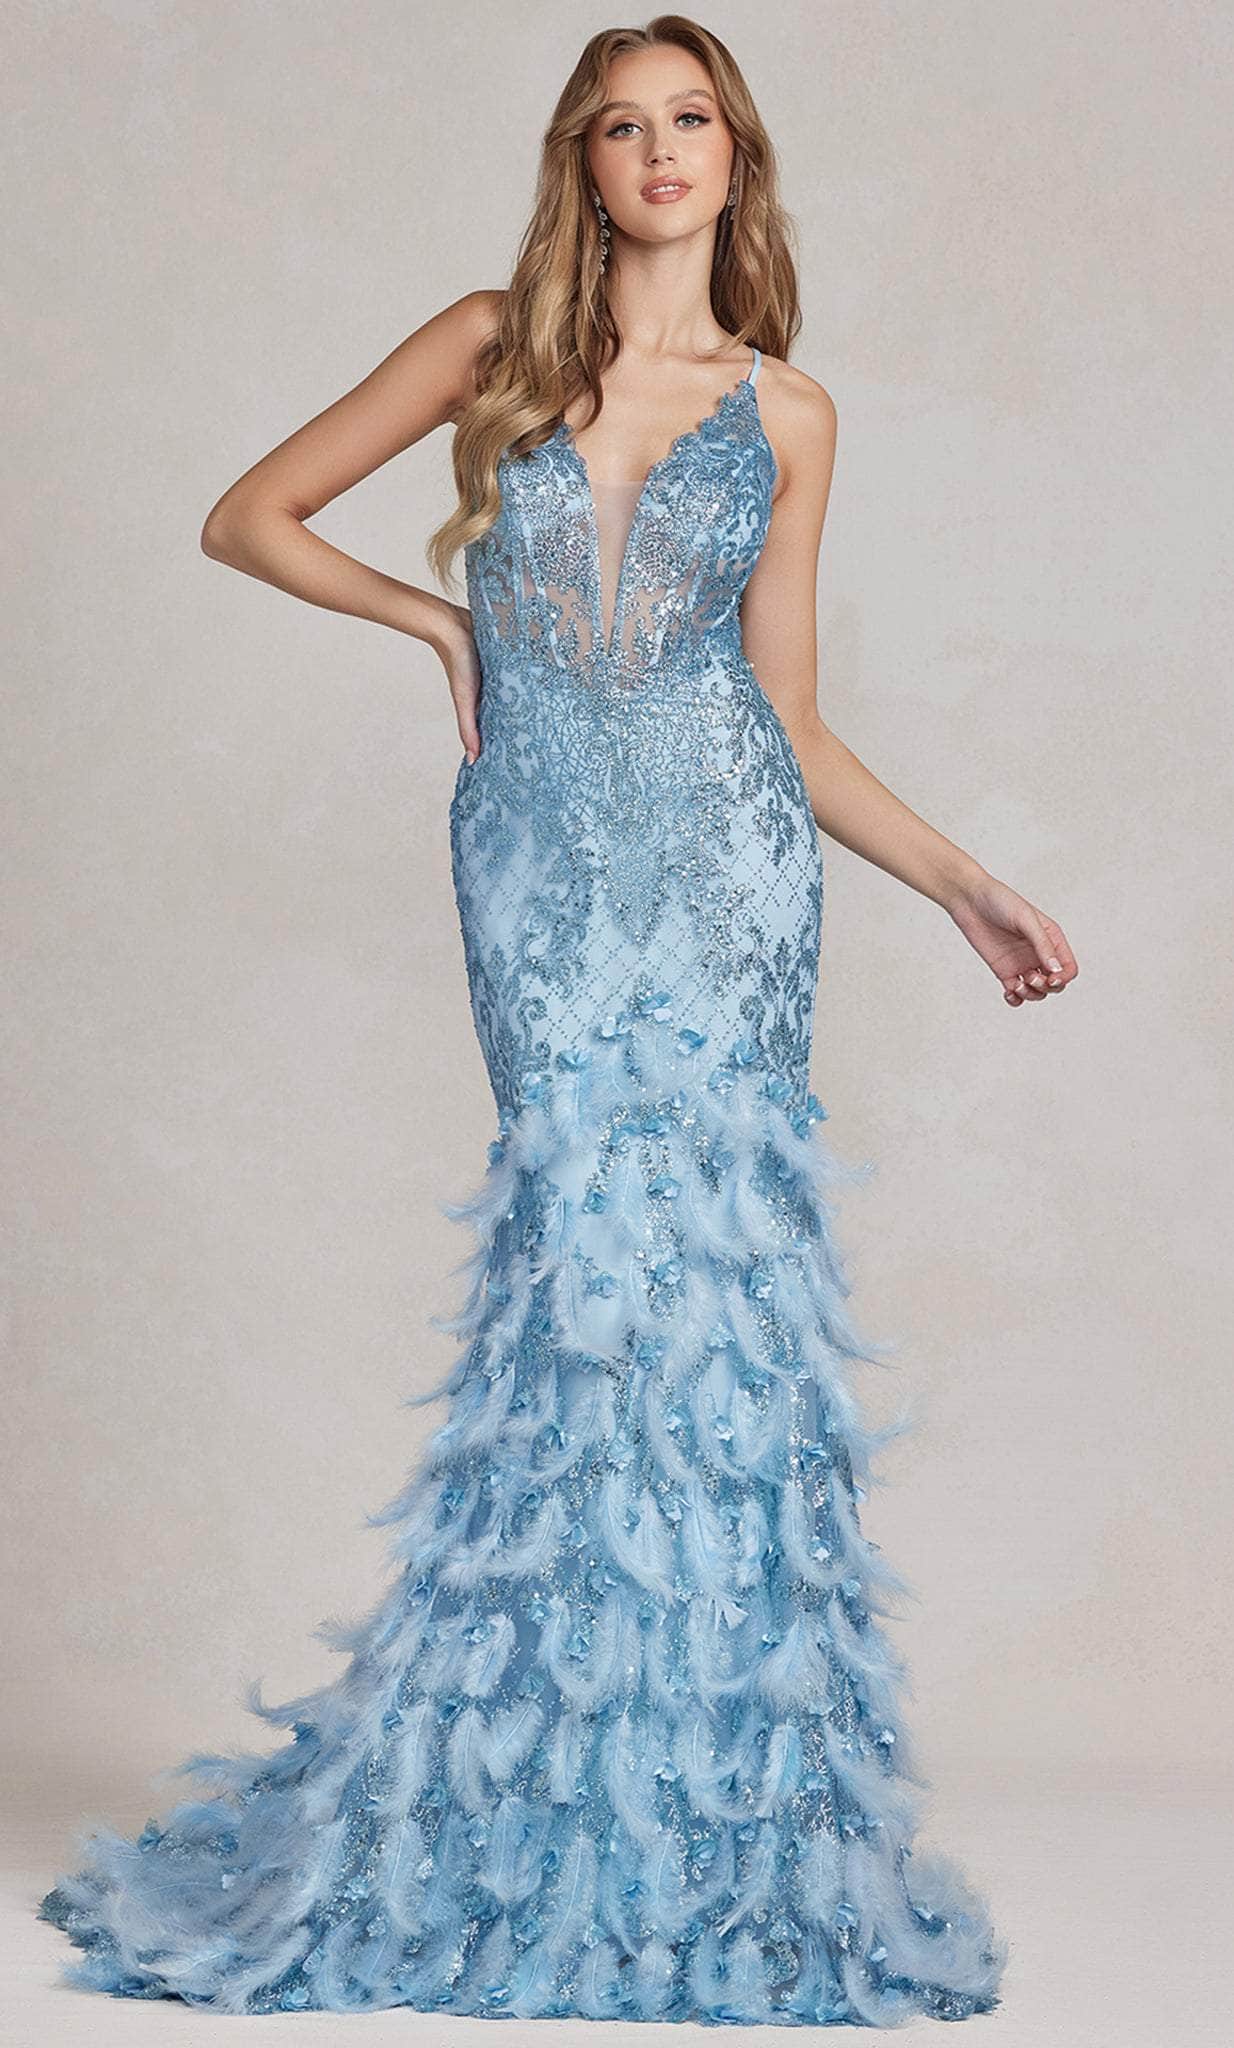 Image of Nox Anabel C1111 - Feathered Skirt Prom Gown